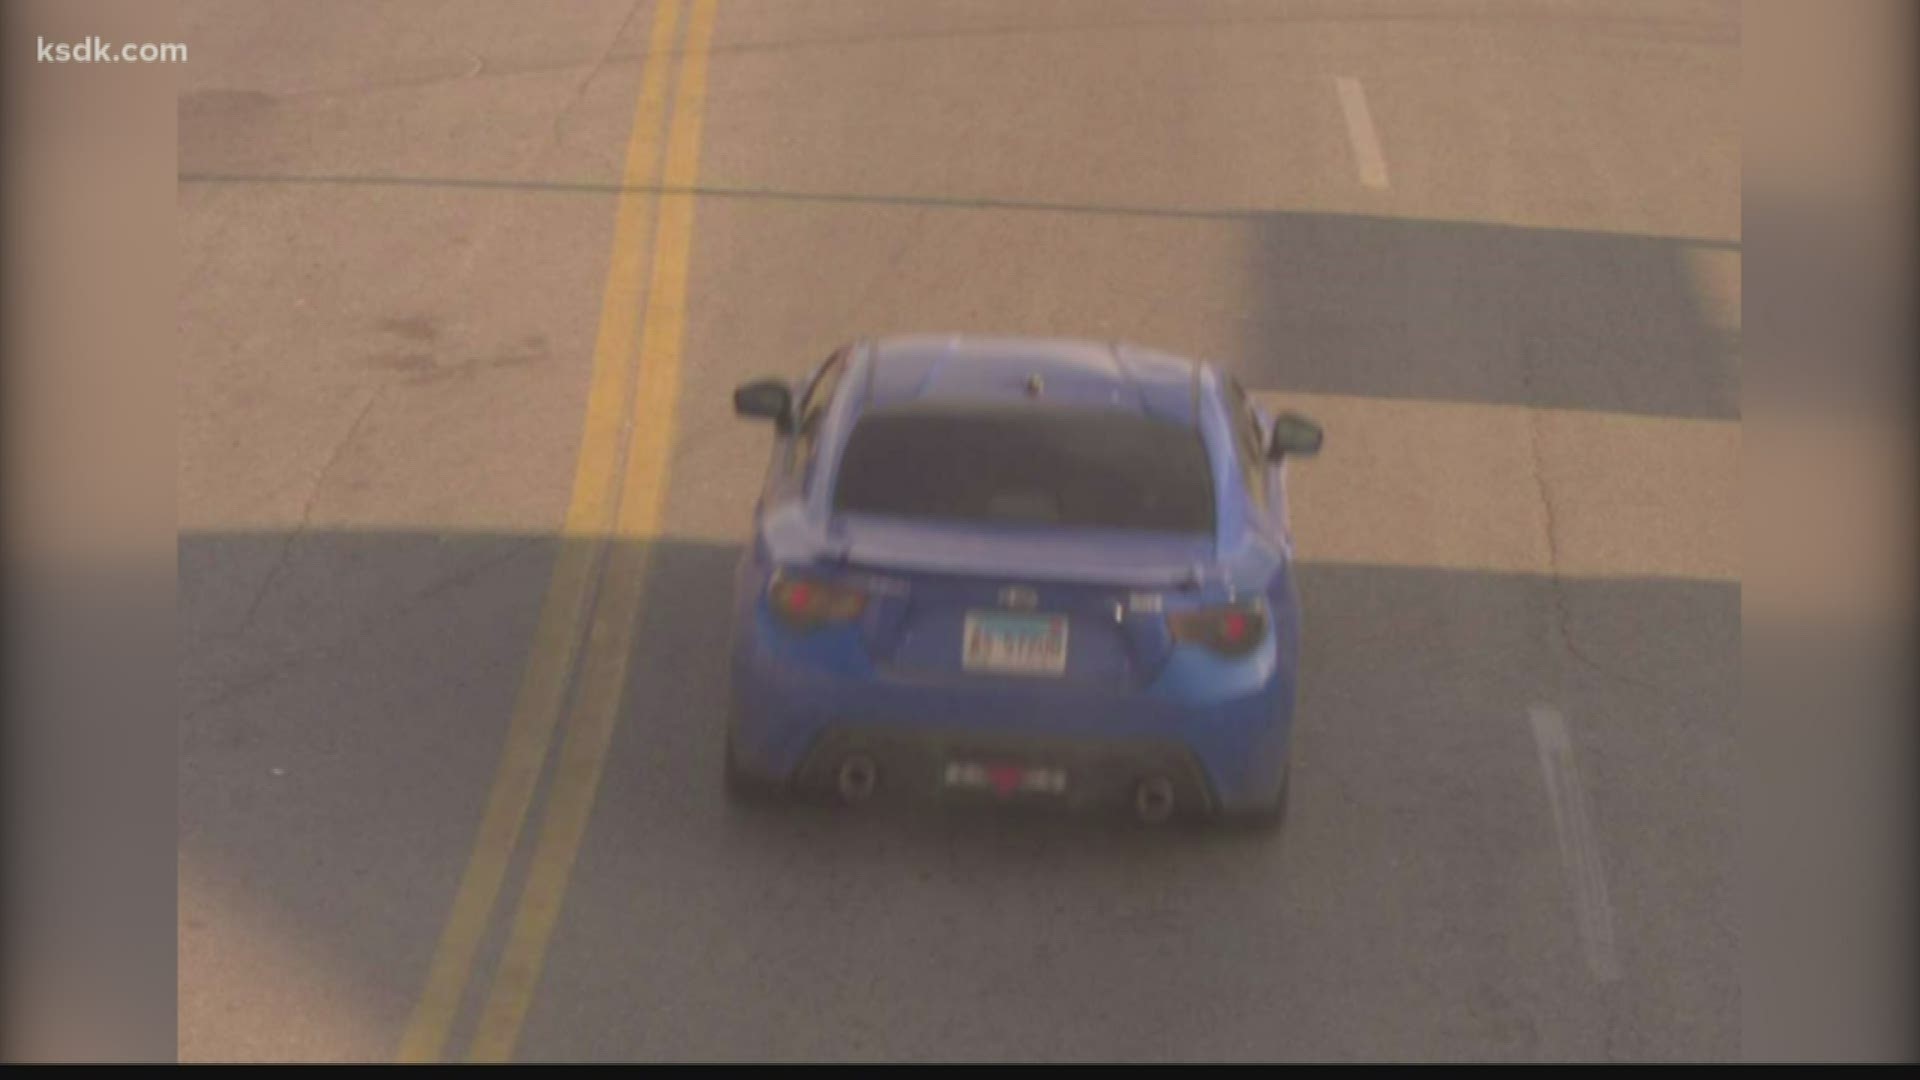 St. Louis police said a woman was standing near Chippewa Street and Louisiana Avenue at around 4:30 when a man in a blue Subaru BRZ drove up and fired at her feet.